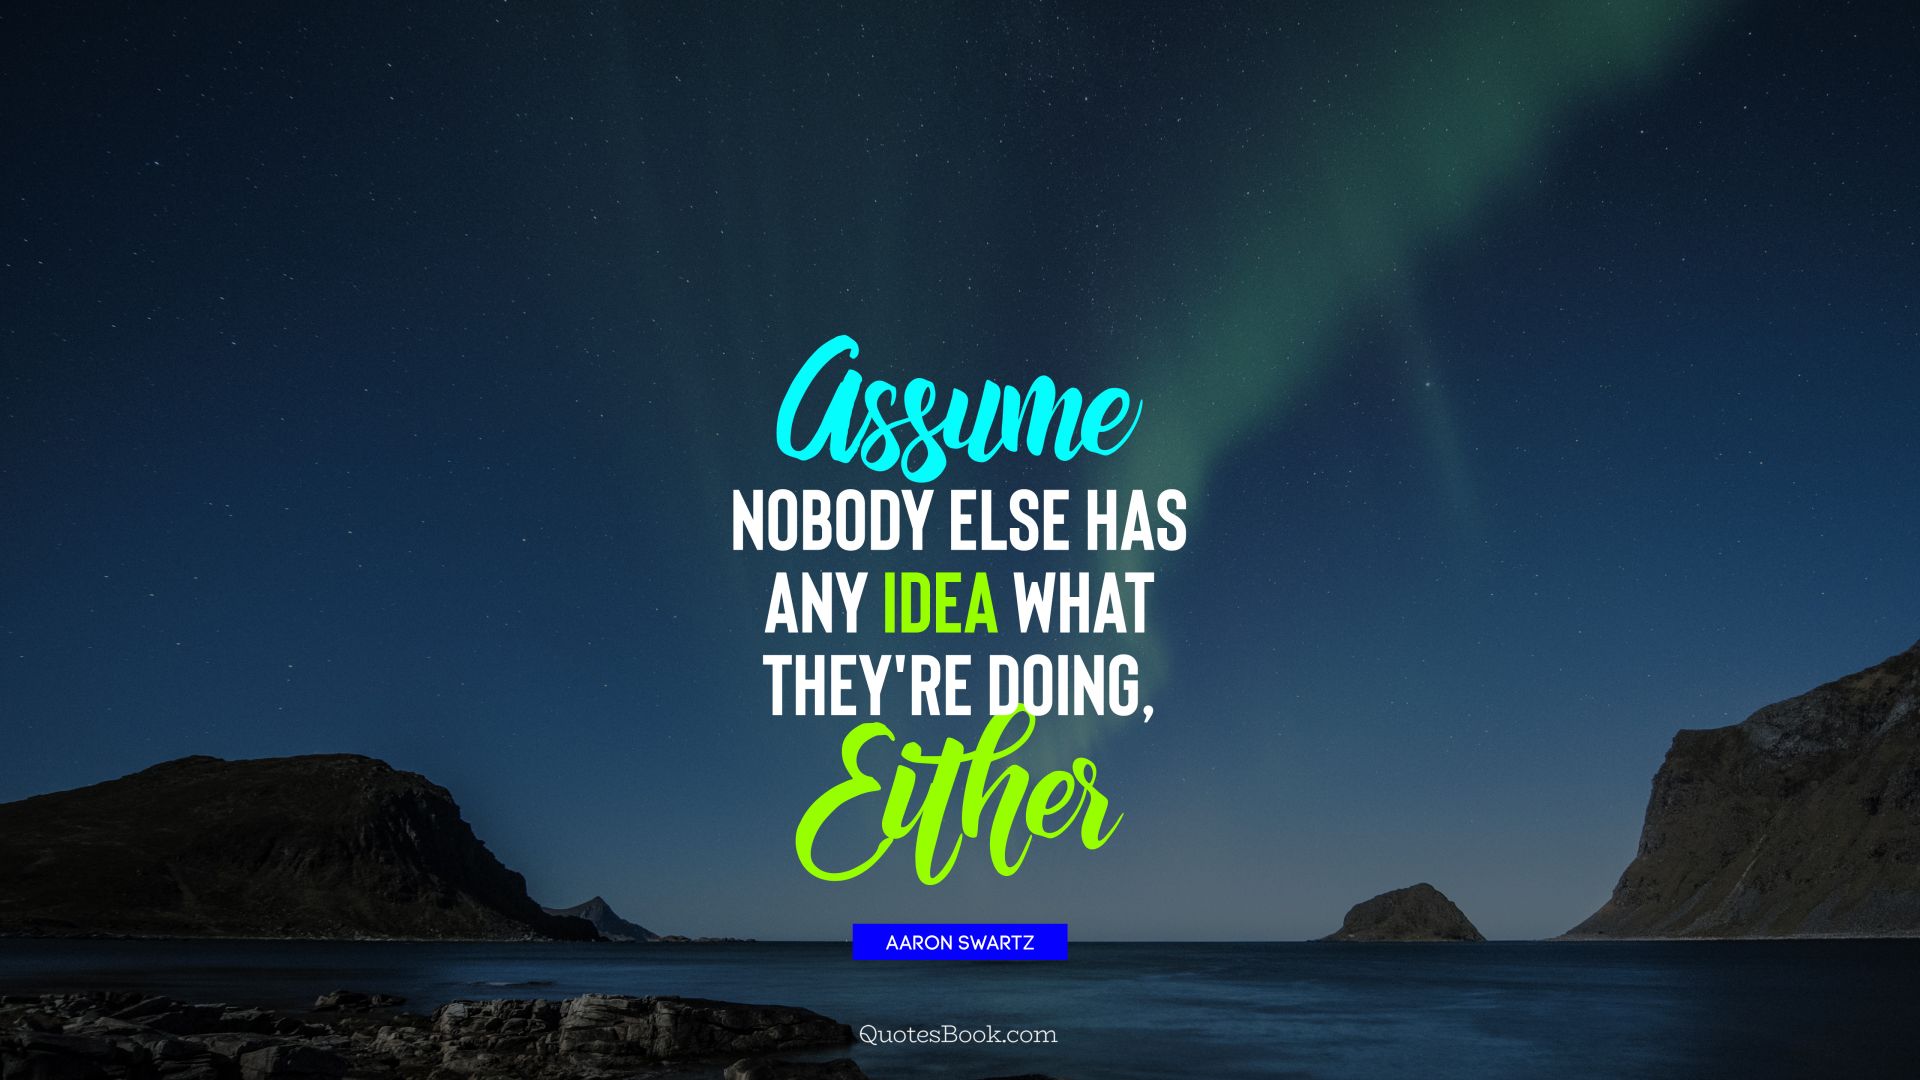 Assume nobody else has any idea what they're doing, either. - Quote by Aaron Swartz